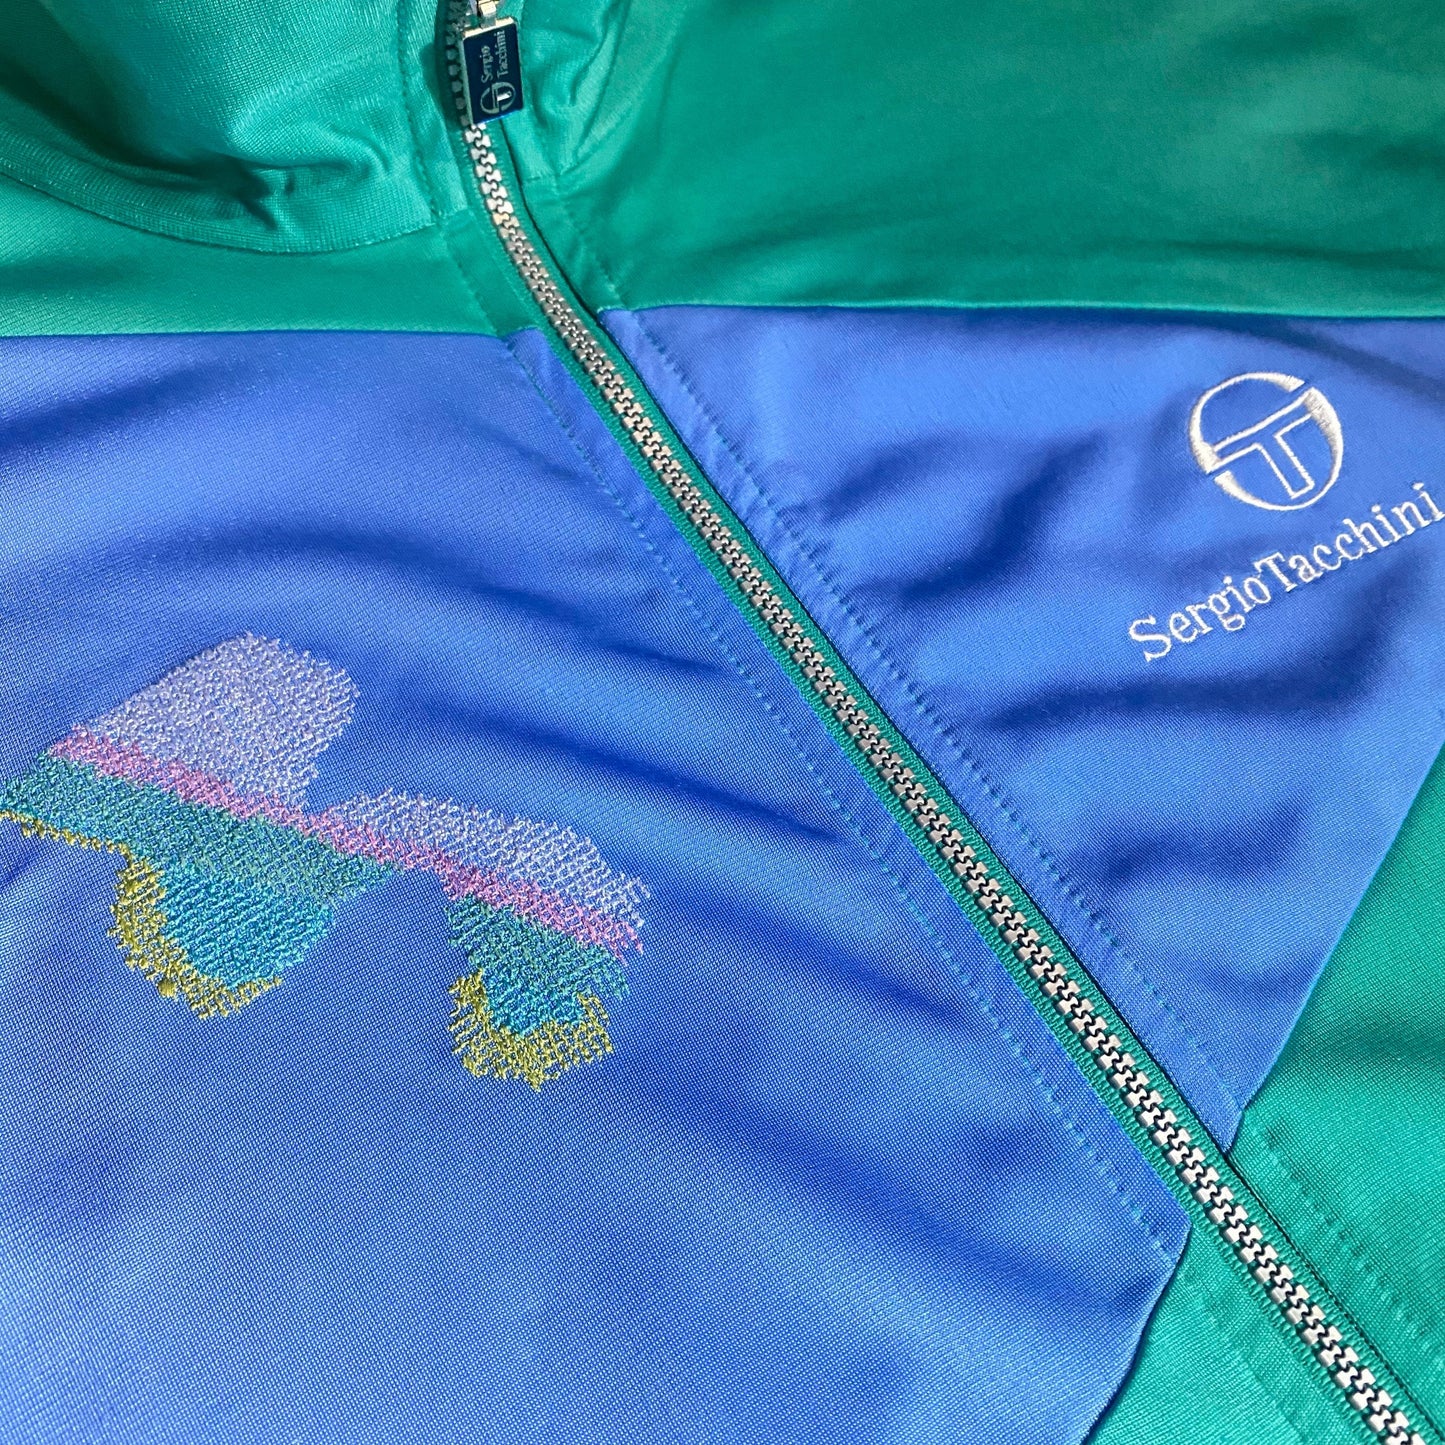 Sergio Tacchini 90s colorful patchwork tracktop jacket with embroidered details, Mint condition.